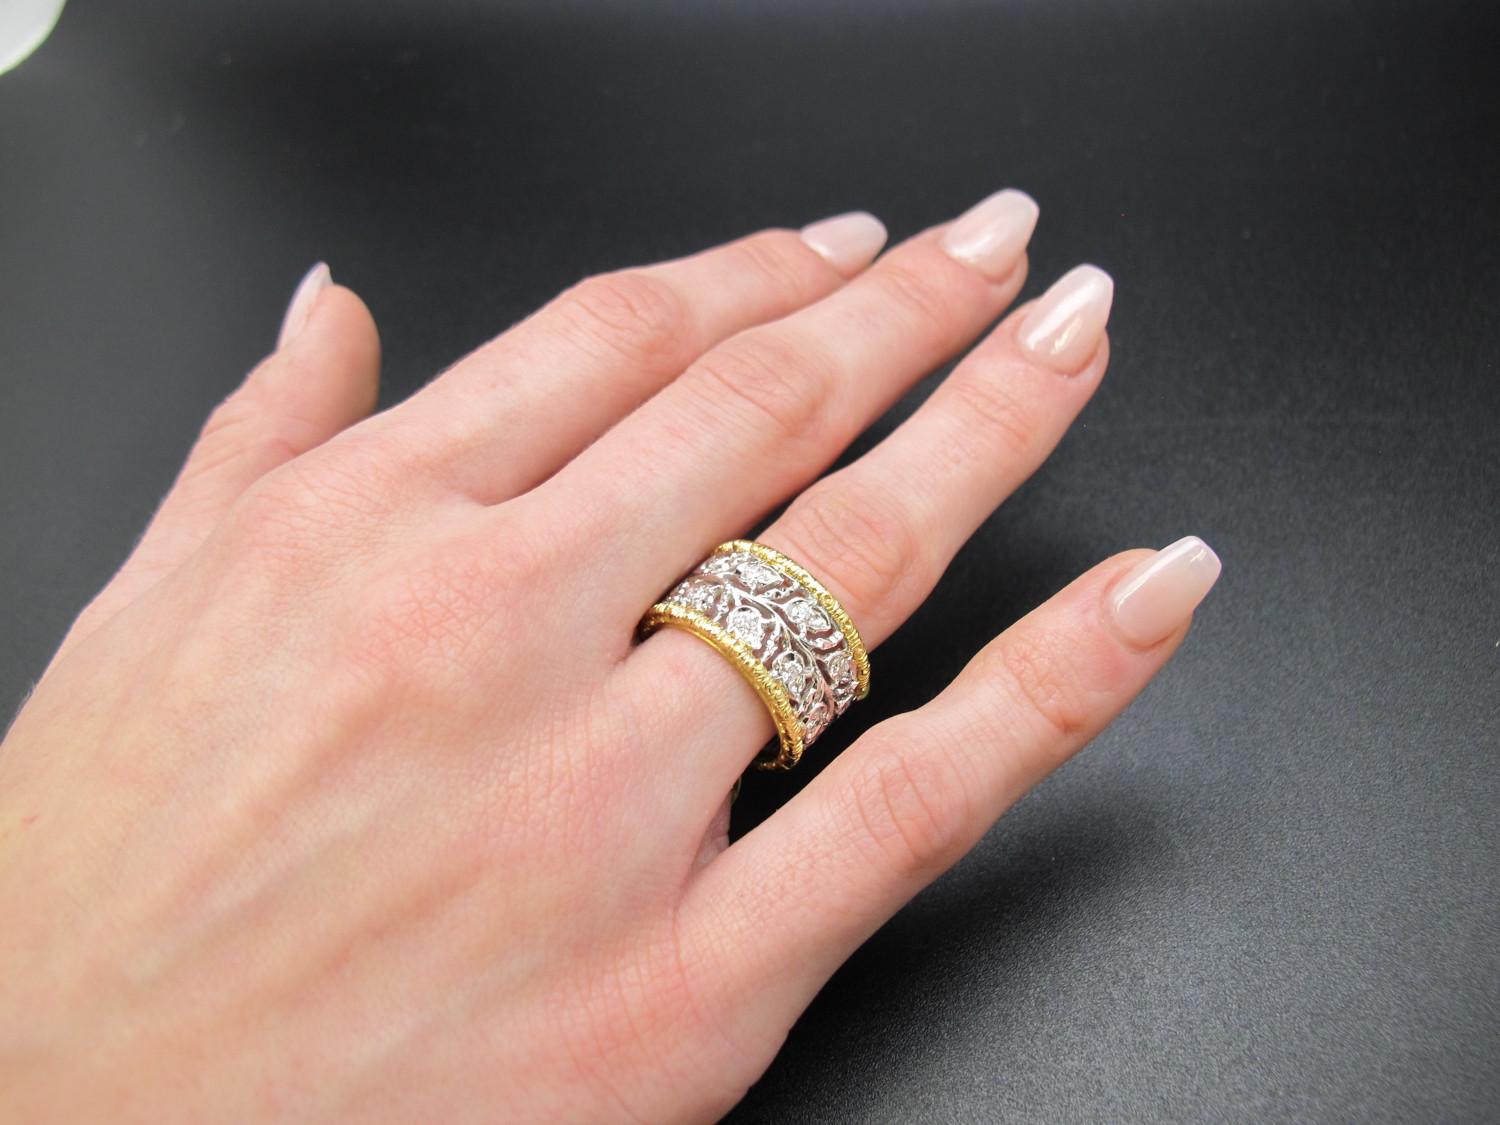 Artisan Italian Florentine Eternity Band with Diamonds in White and Yellow Gold 